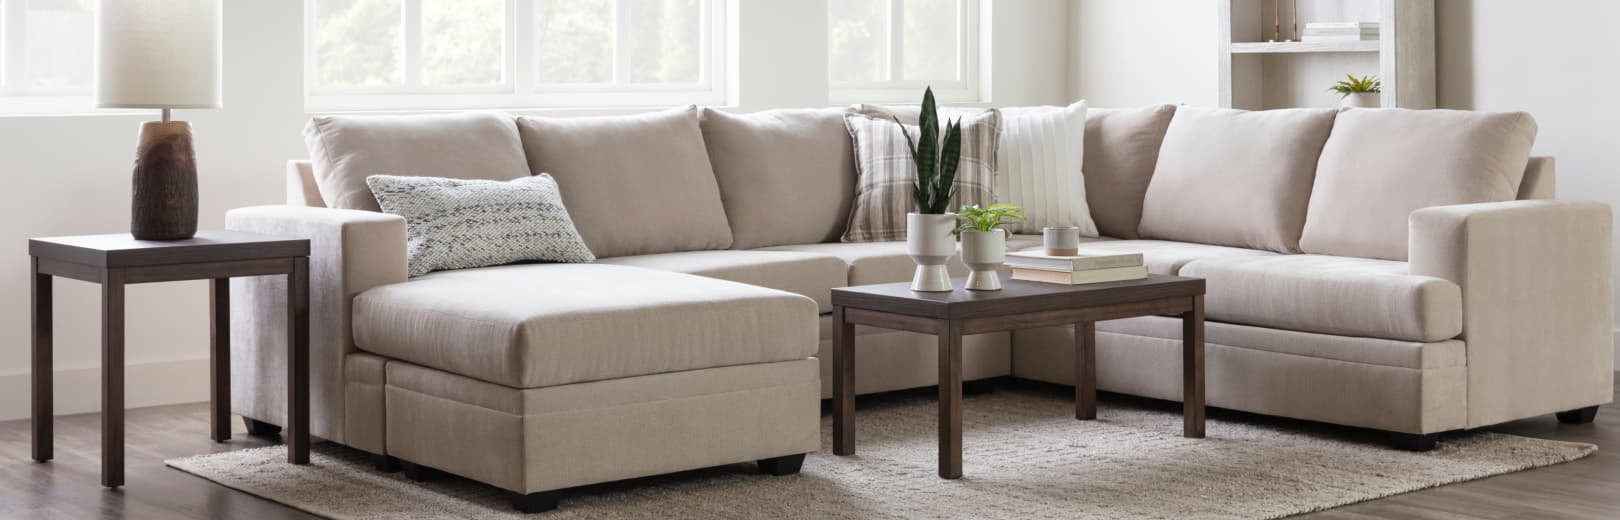 How to Clean a Fabric Couch in 10 Easy Steps - Premium Clean